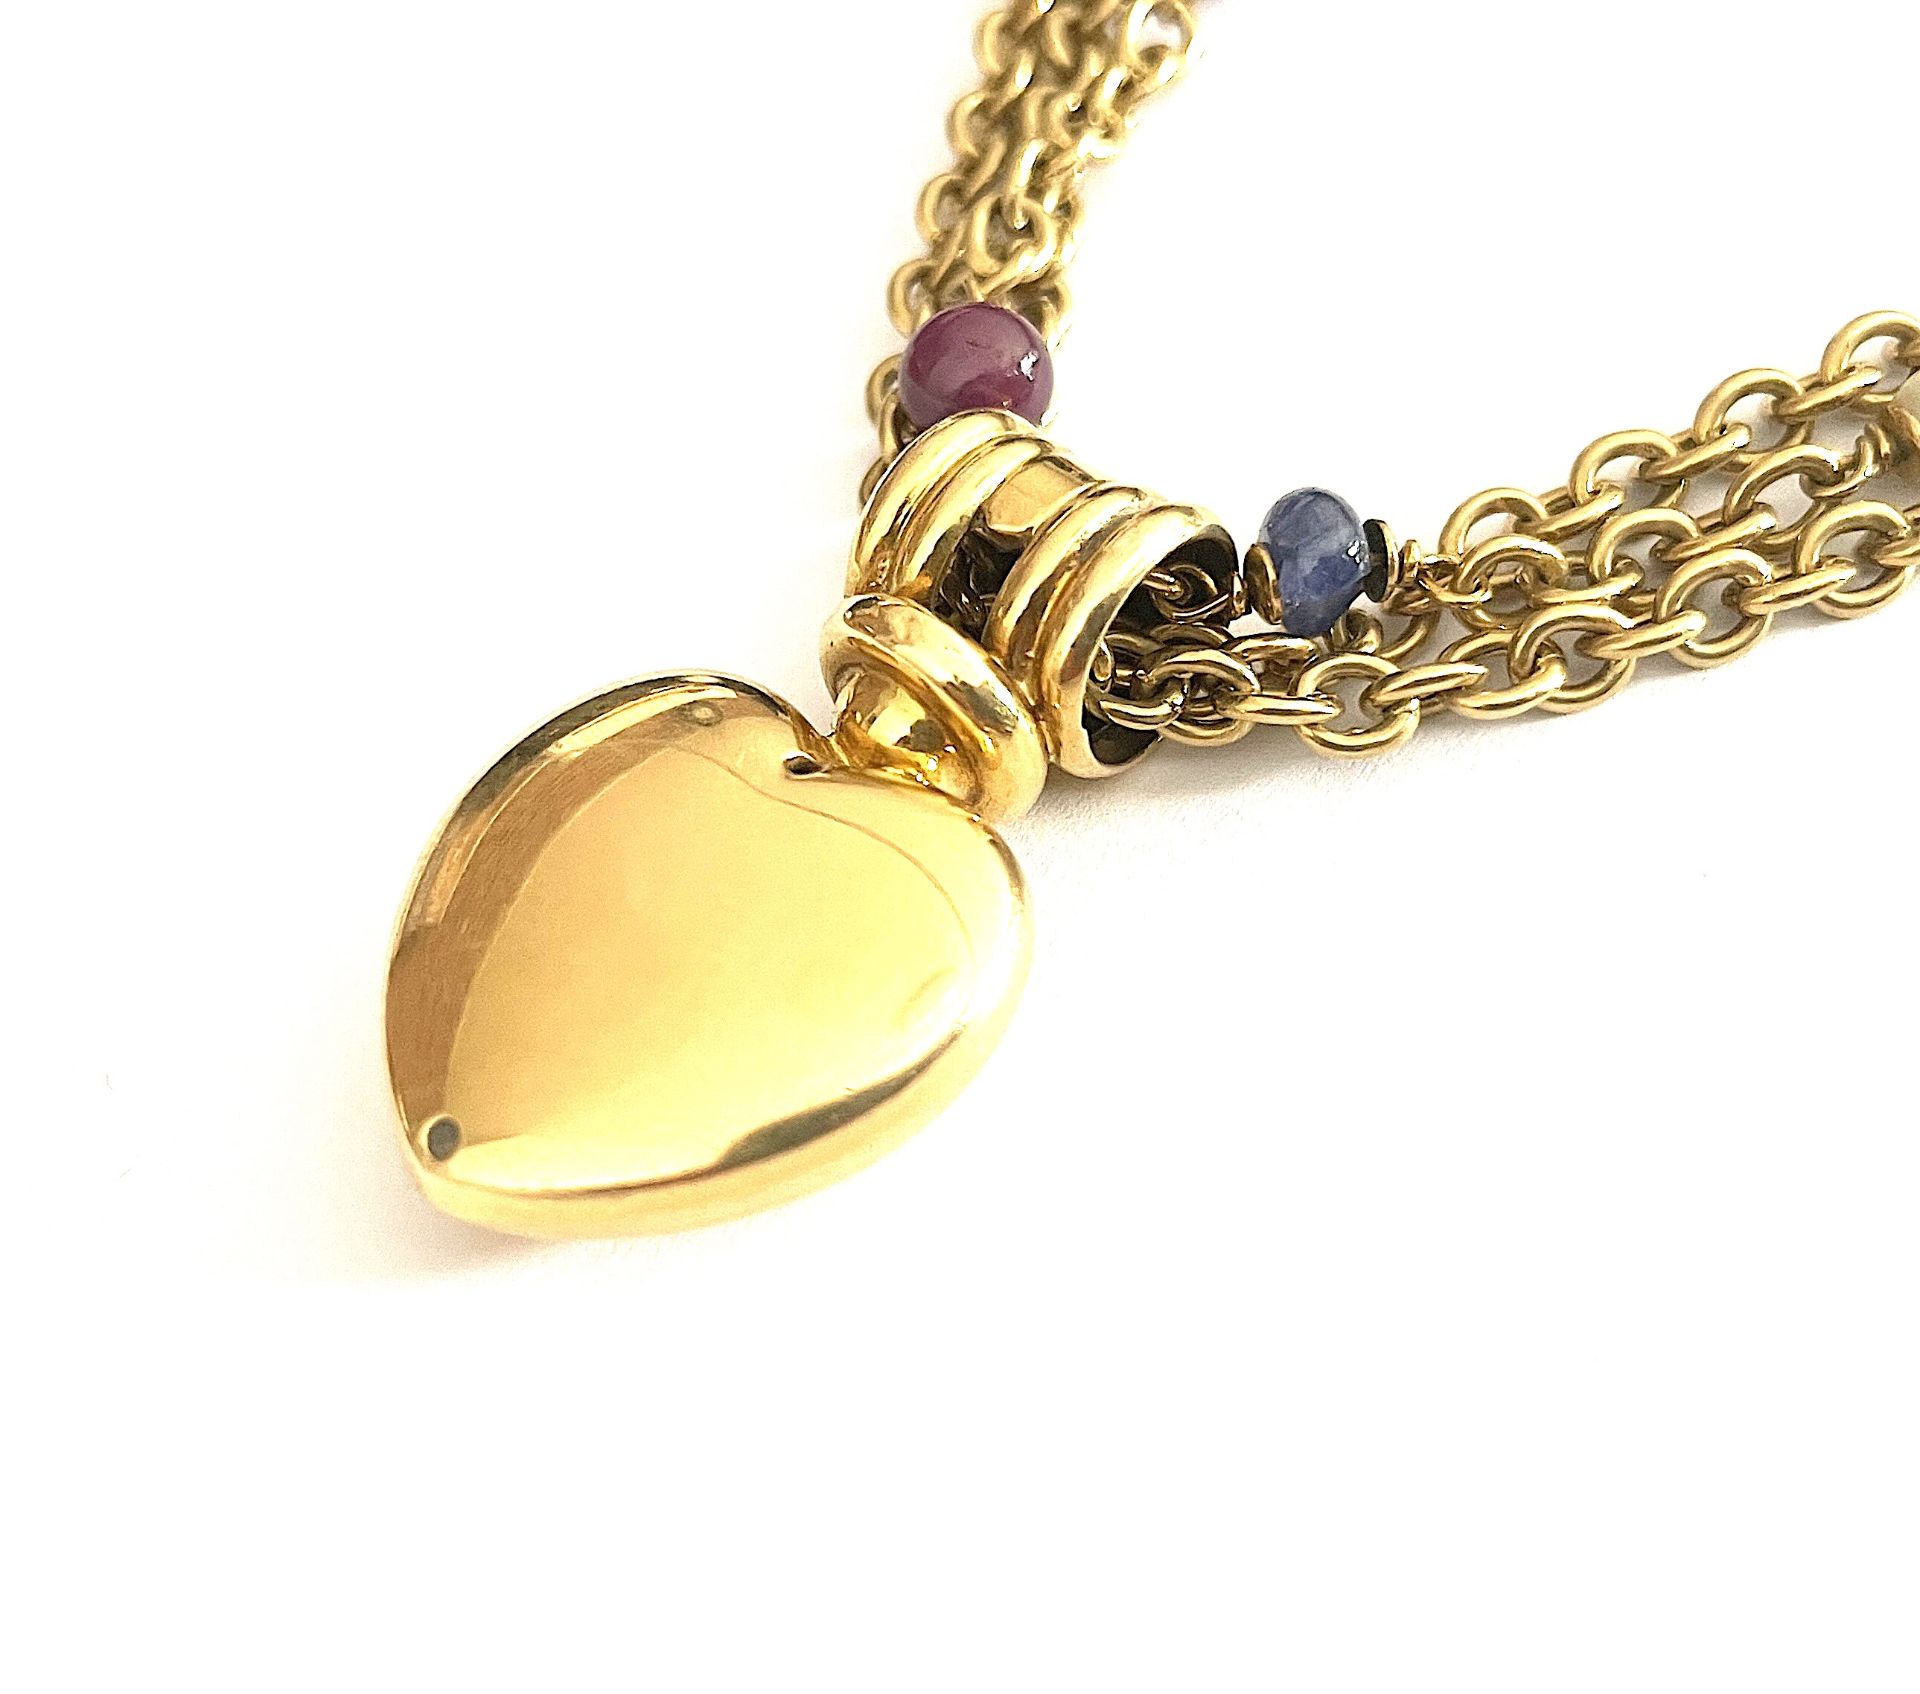 3 strands gemstone necklace with diamond heart - Image 4 of 6